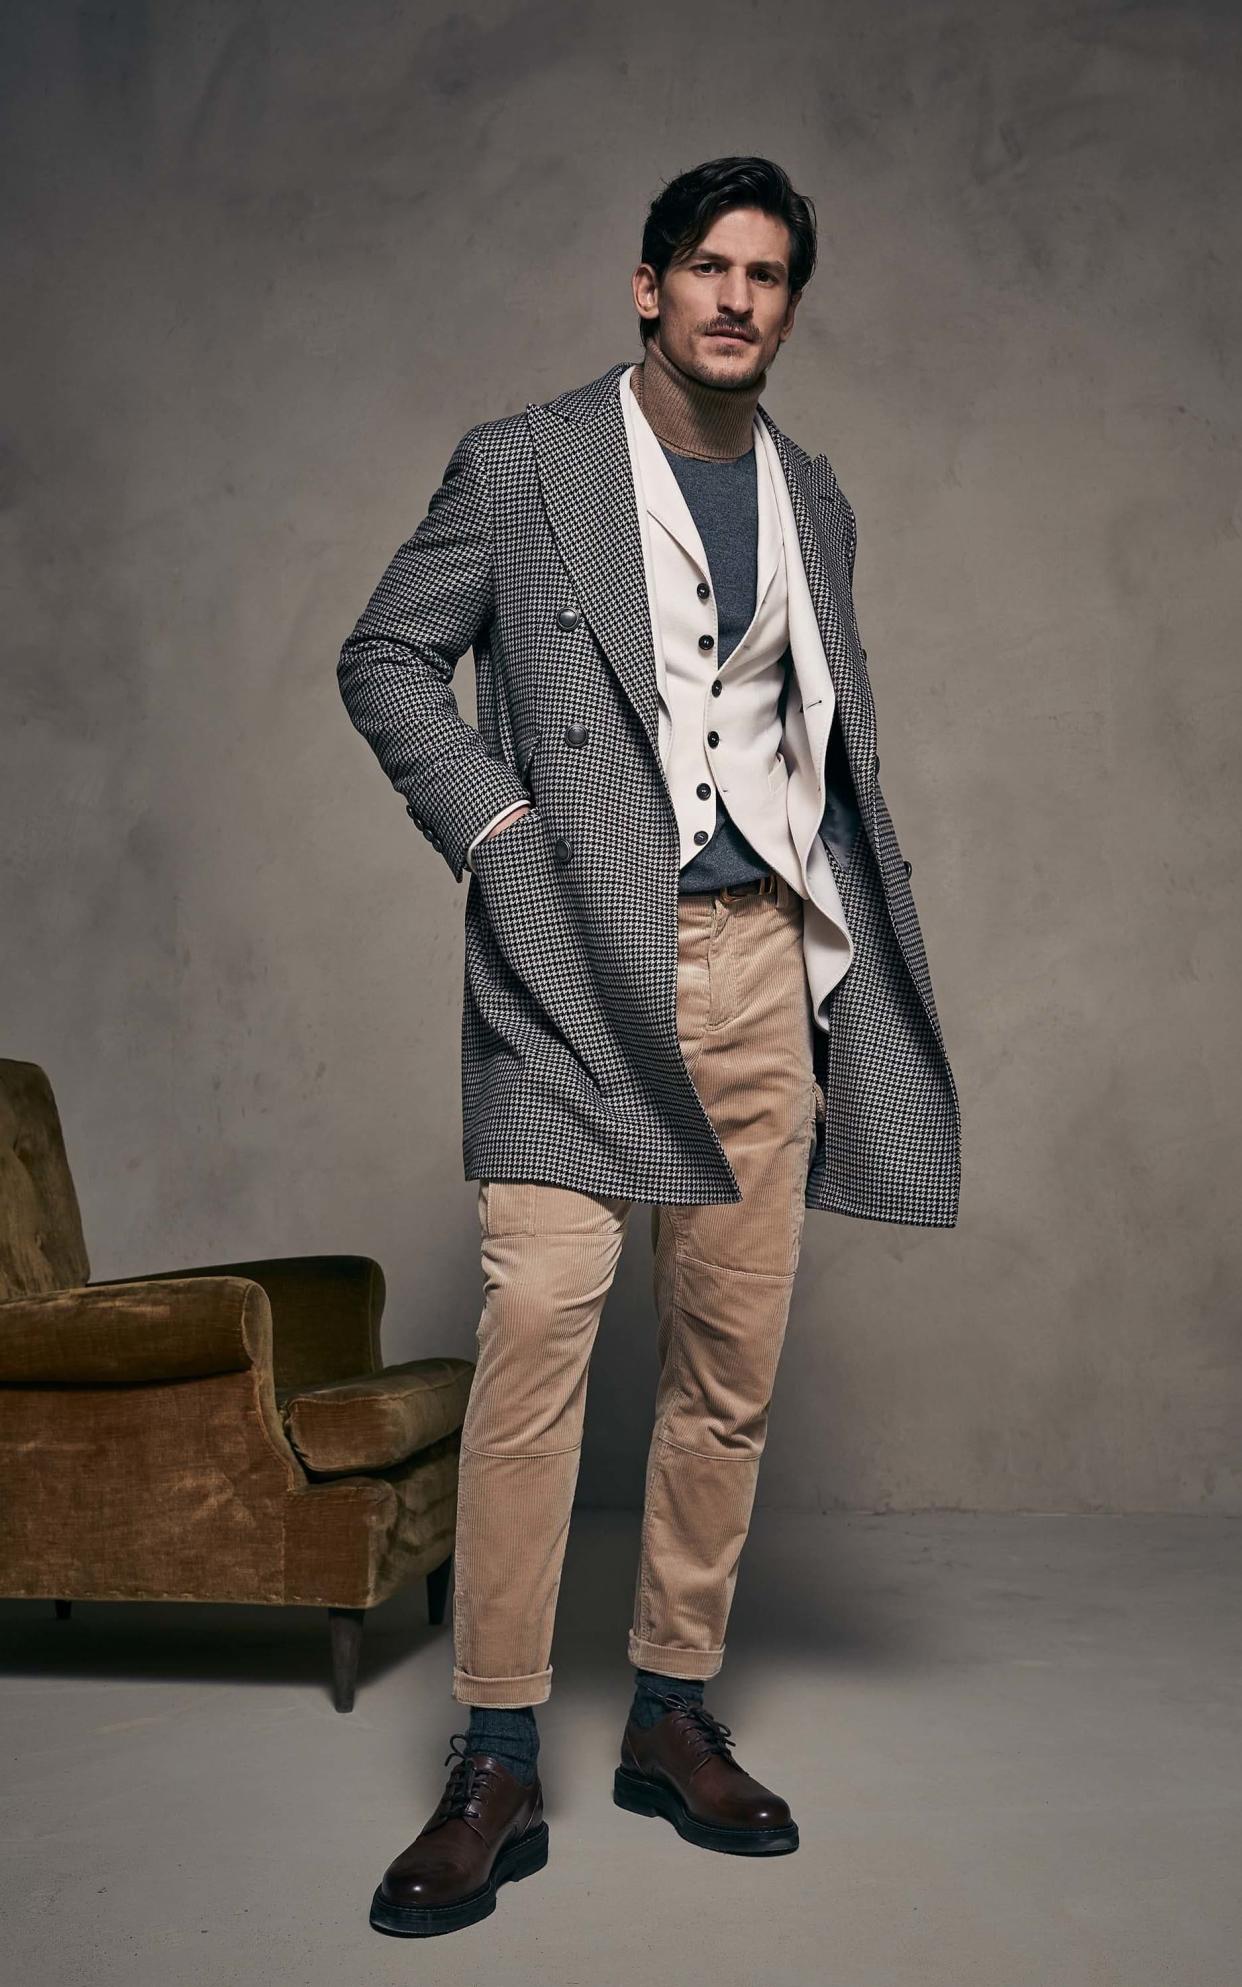 Italian cashmere titan Brunello Cucinelli tweaks the formula of formal suiting with a polo neck and blazer combination